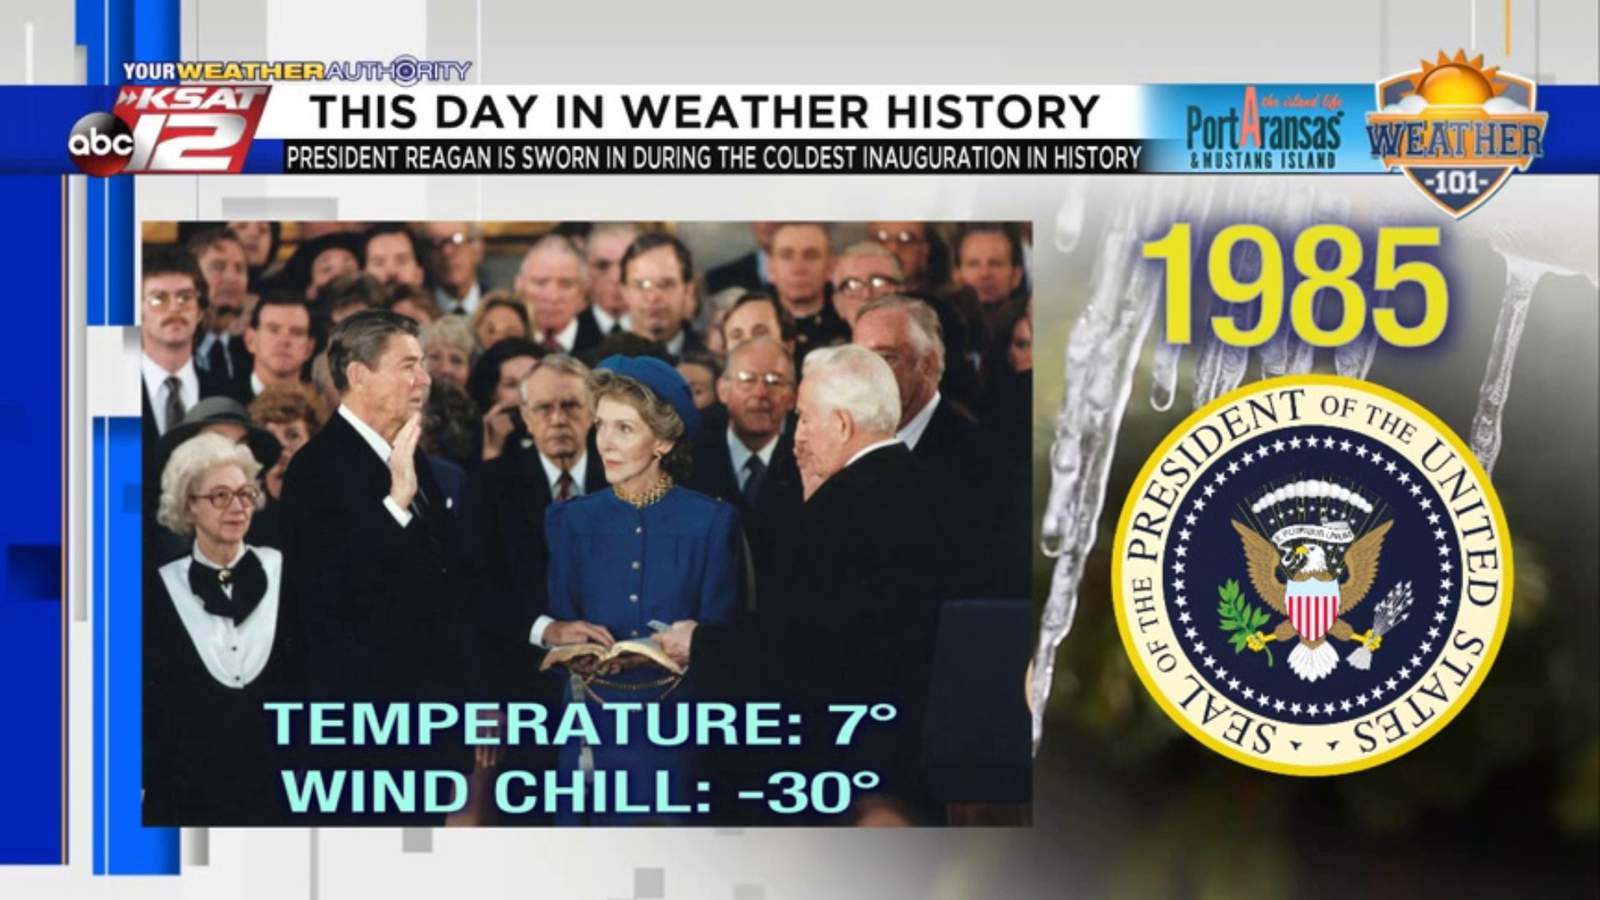 This Day in Weather History: January 21